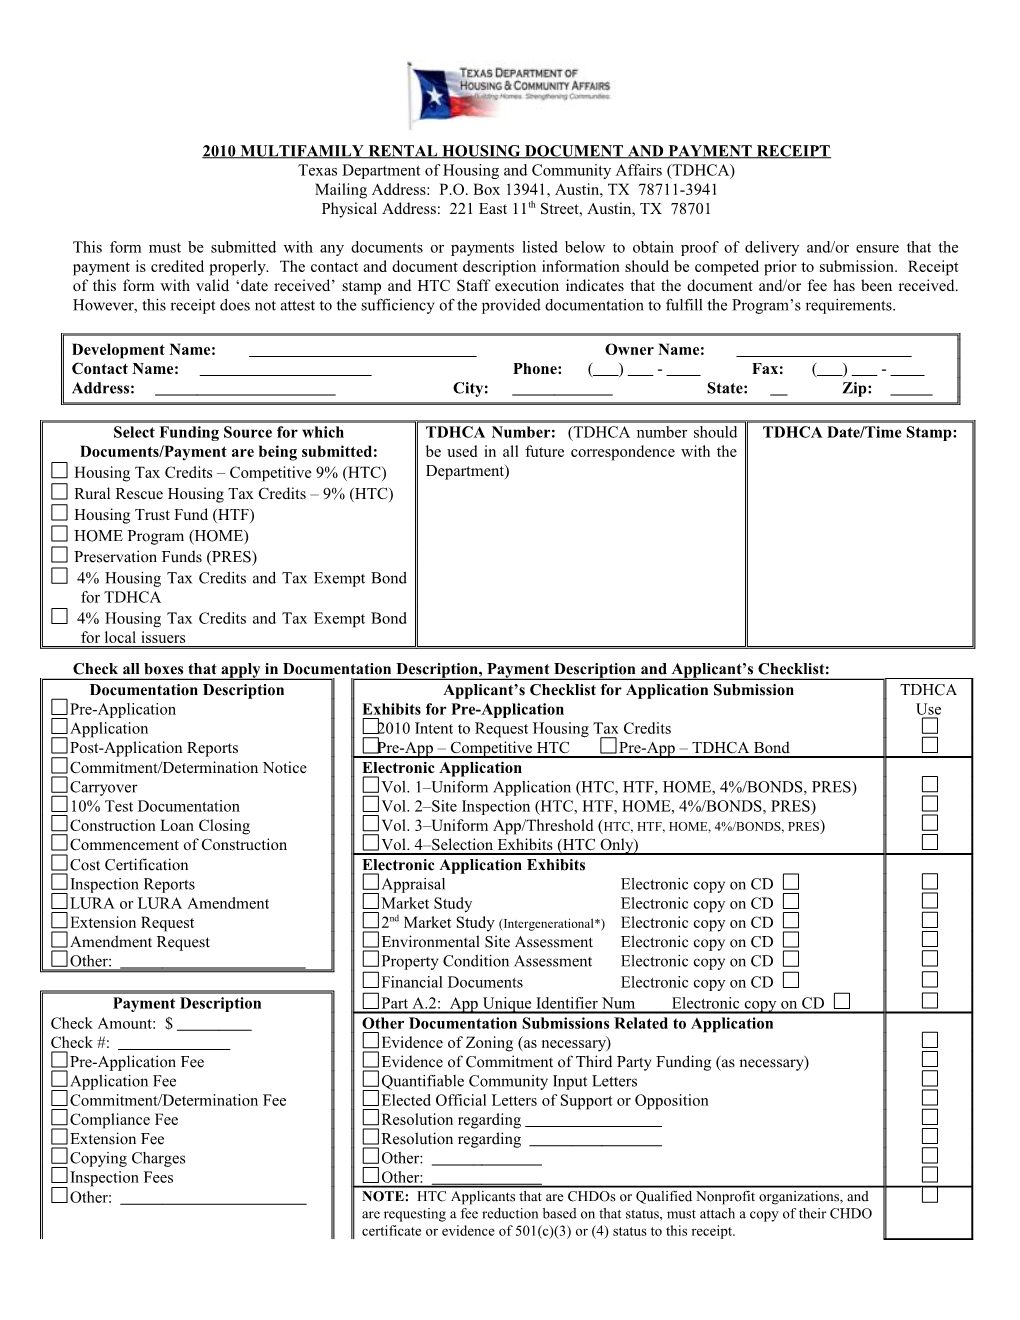 2010 Multifamily Rental Housing Document and Payment Receipt